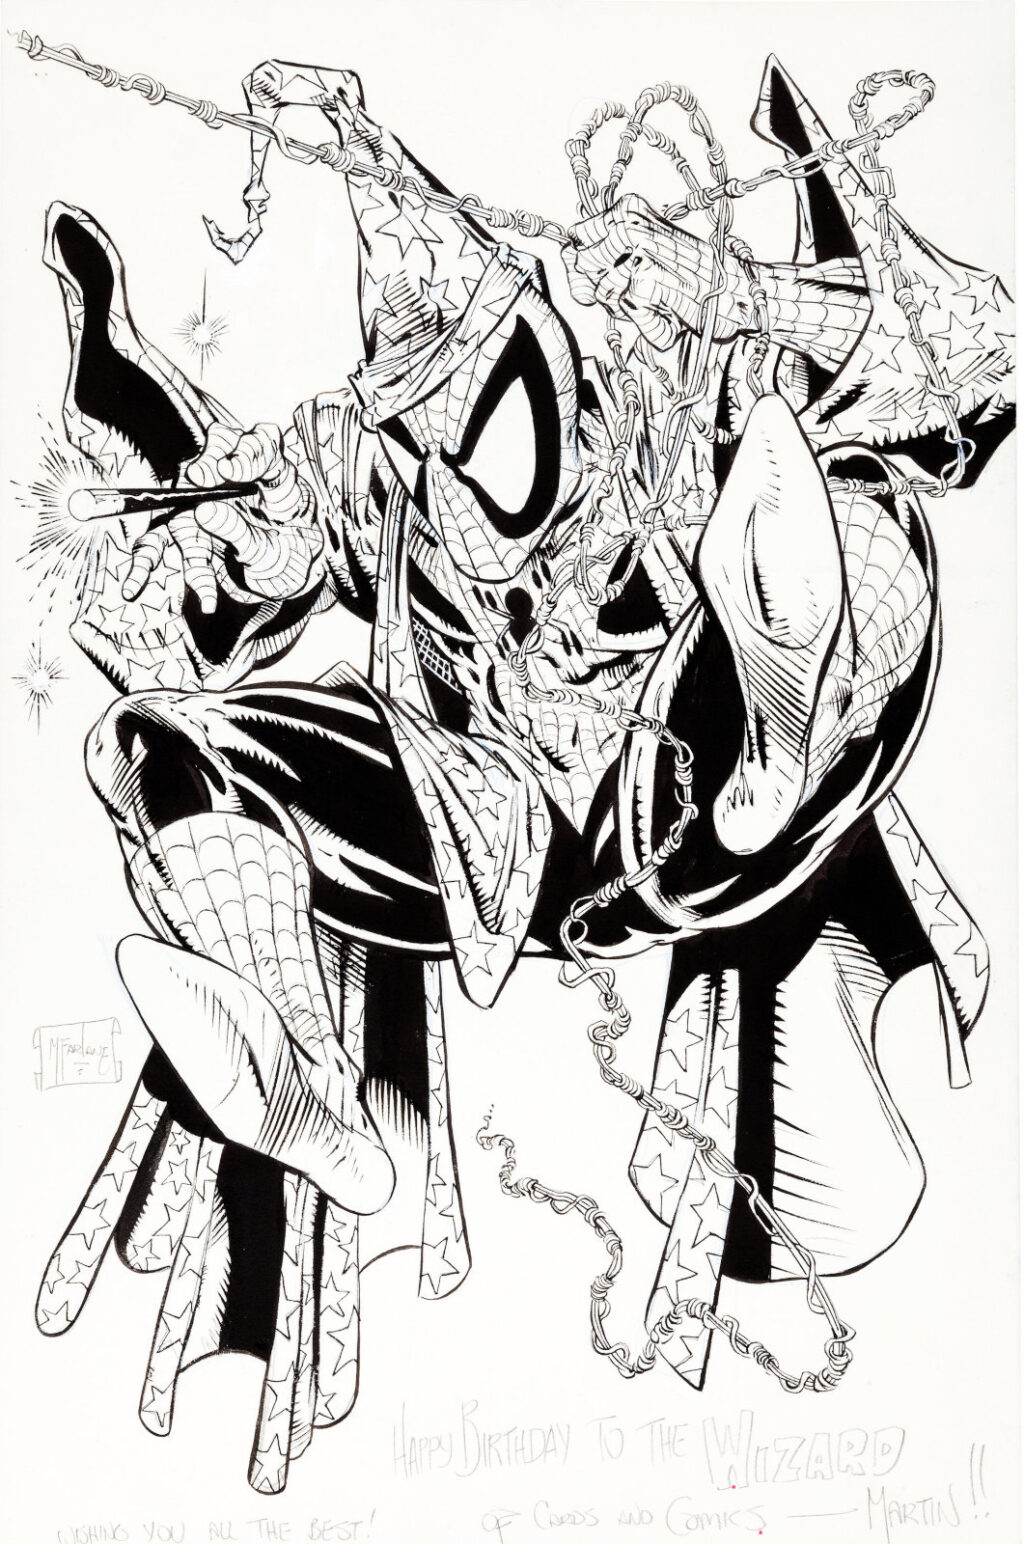 Wizard the Comics Magazine issue 1 cover by Todd McFarlane